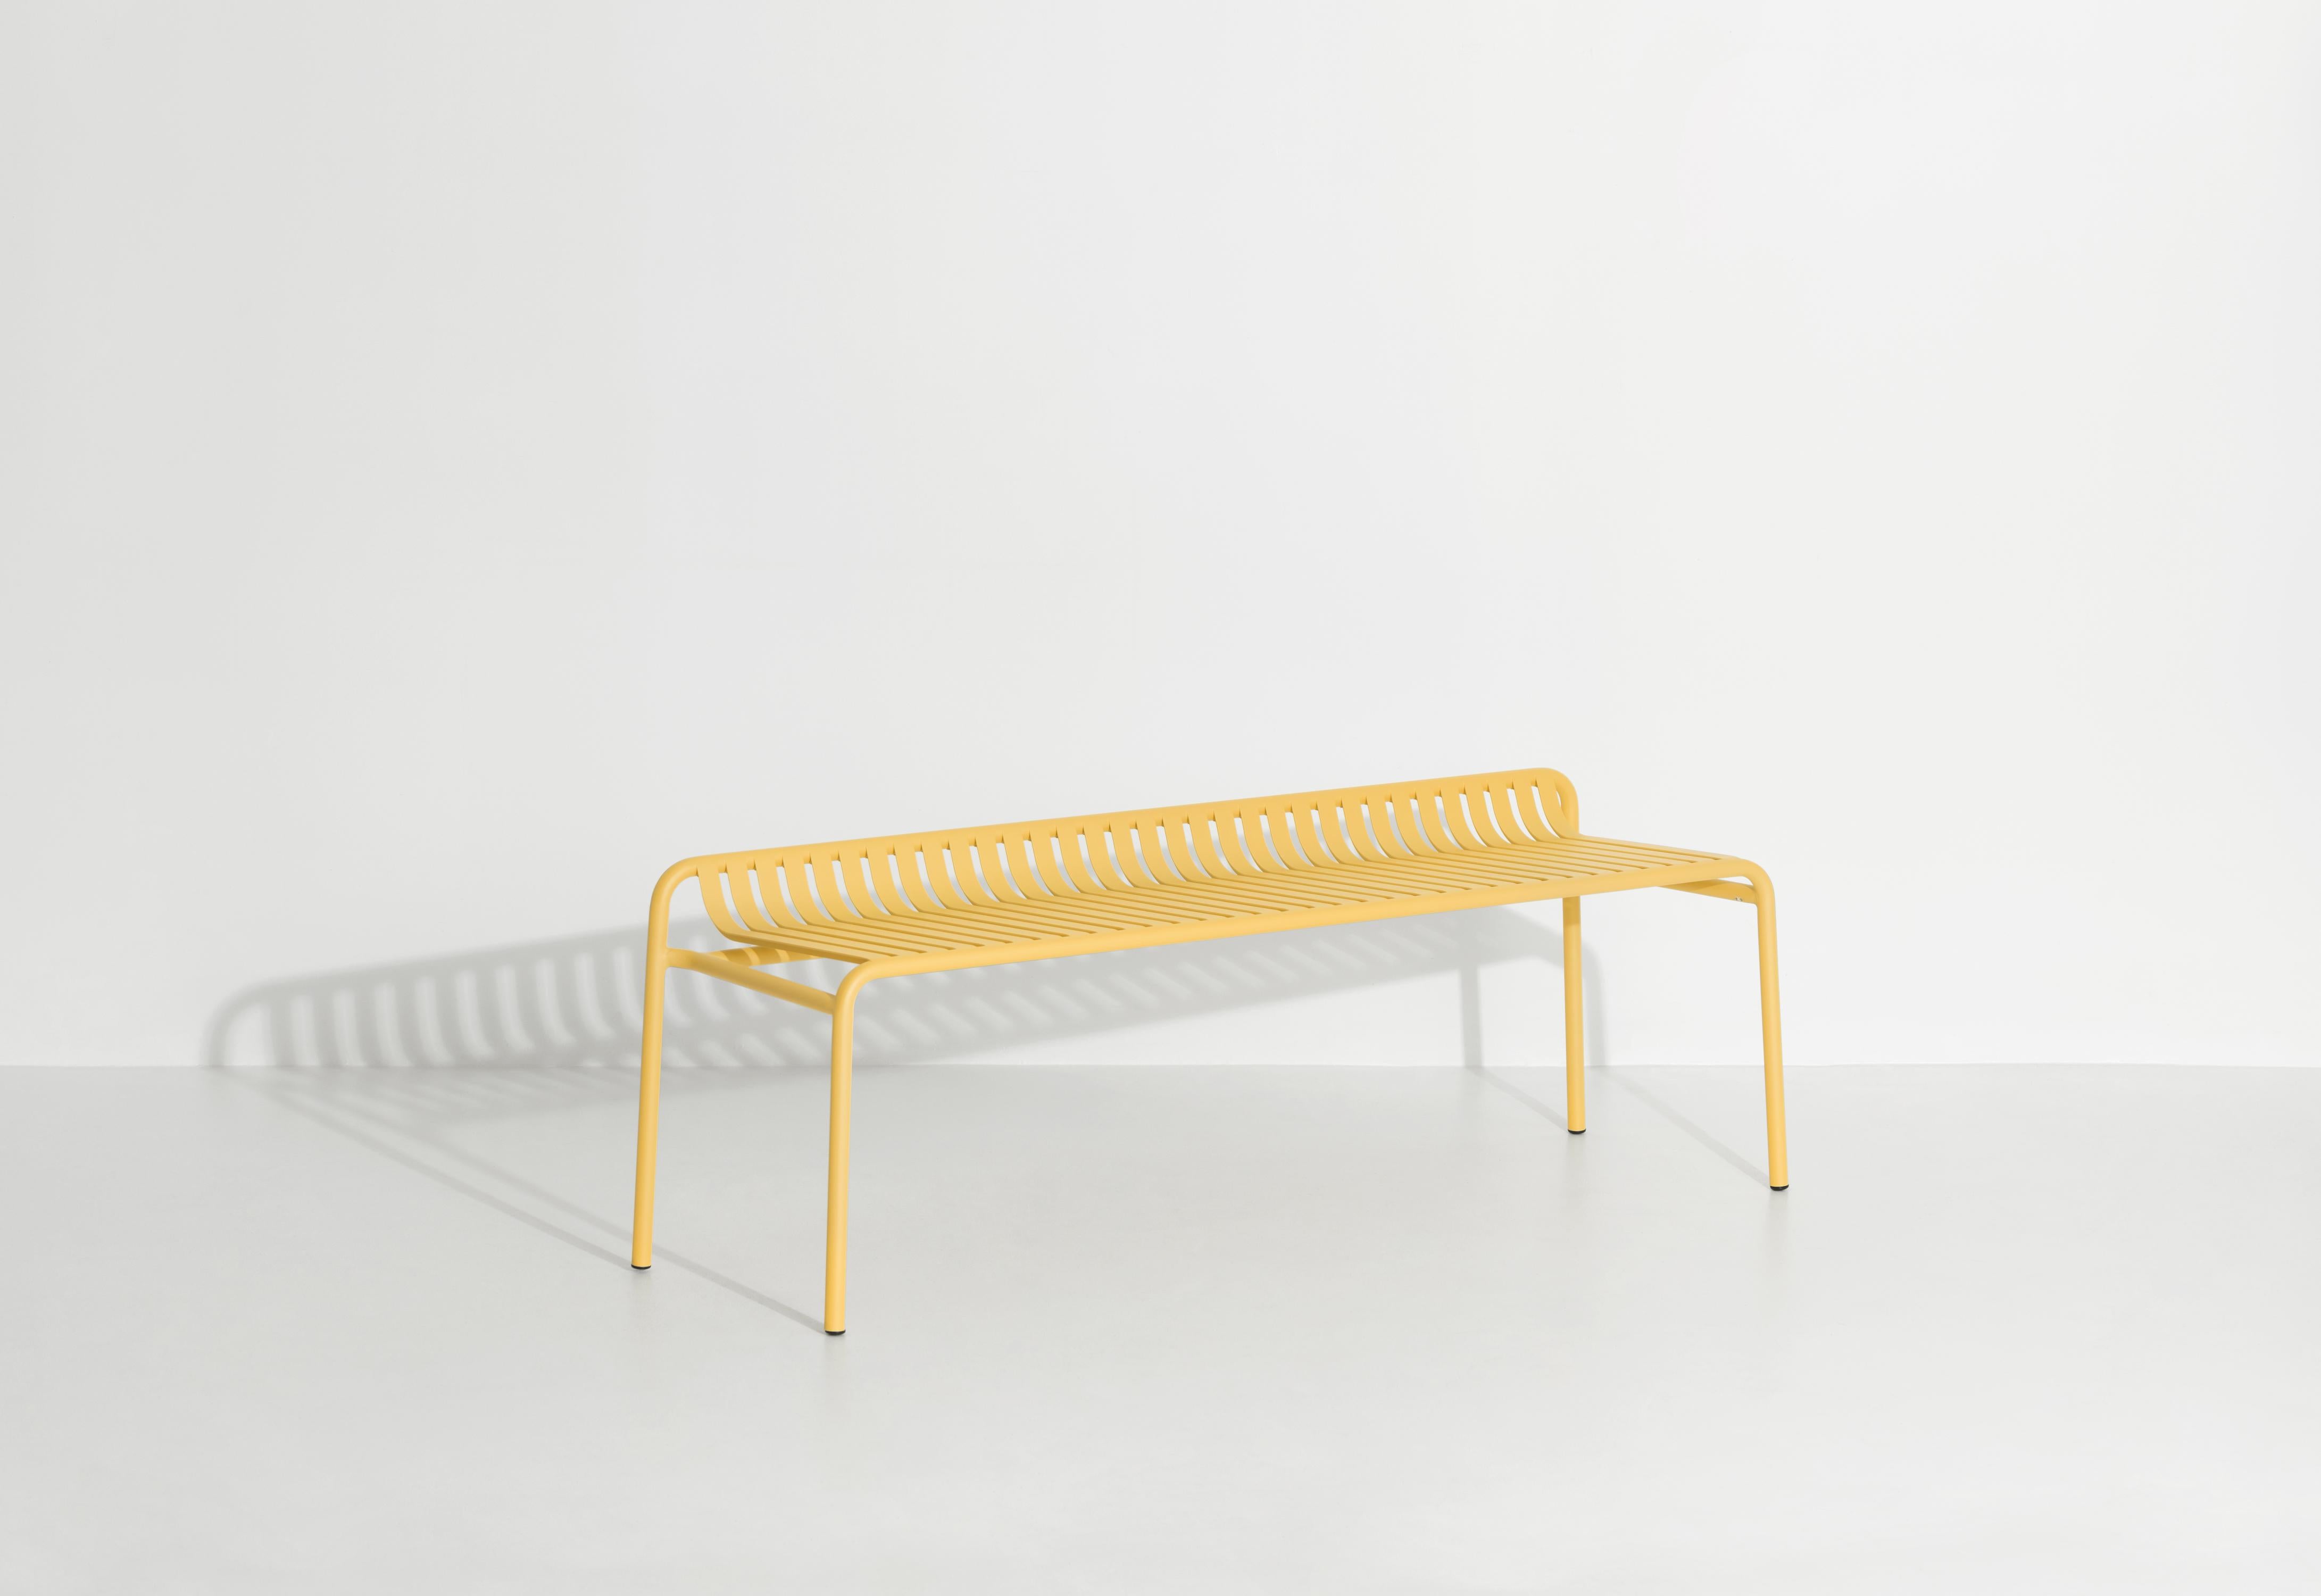 Petite Friture Week-End Bench without Back in Saffron Aluminium by Studio BrichetZiegler, 2017

The week-end collection is a full range of outdoor furniture, in aluminium grained epoxy paint, matt finish, that includes 18 functions and 8 colours